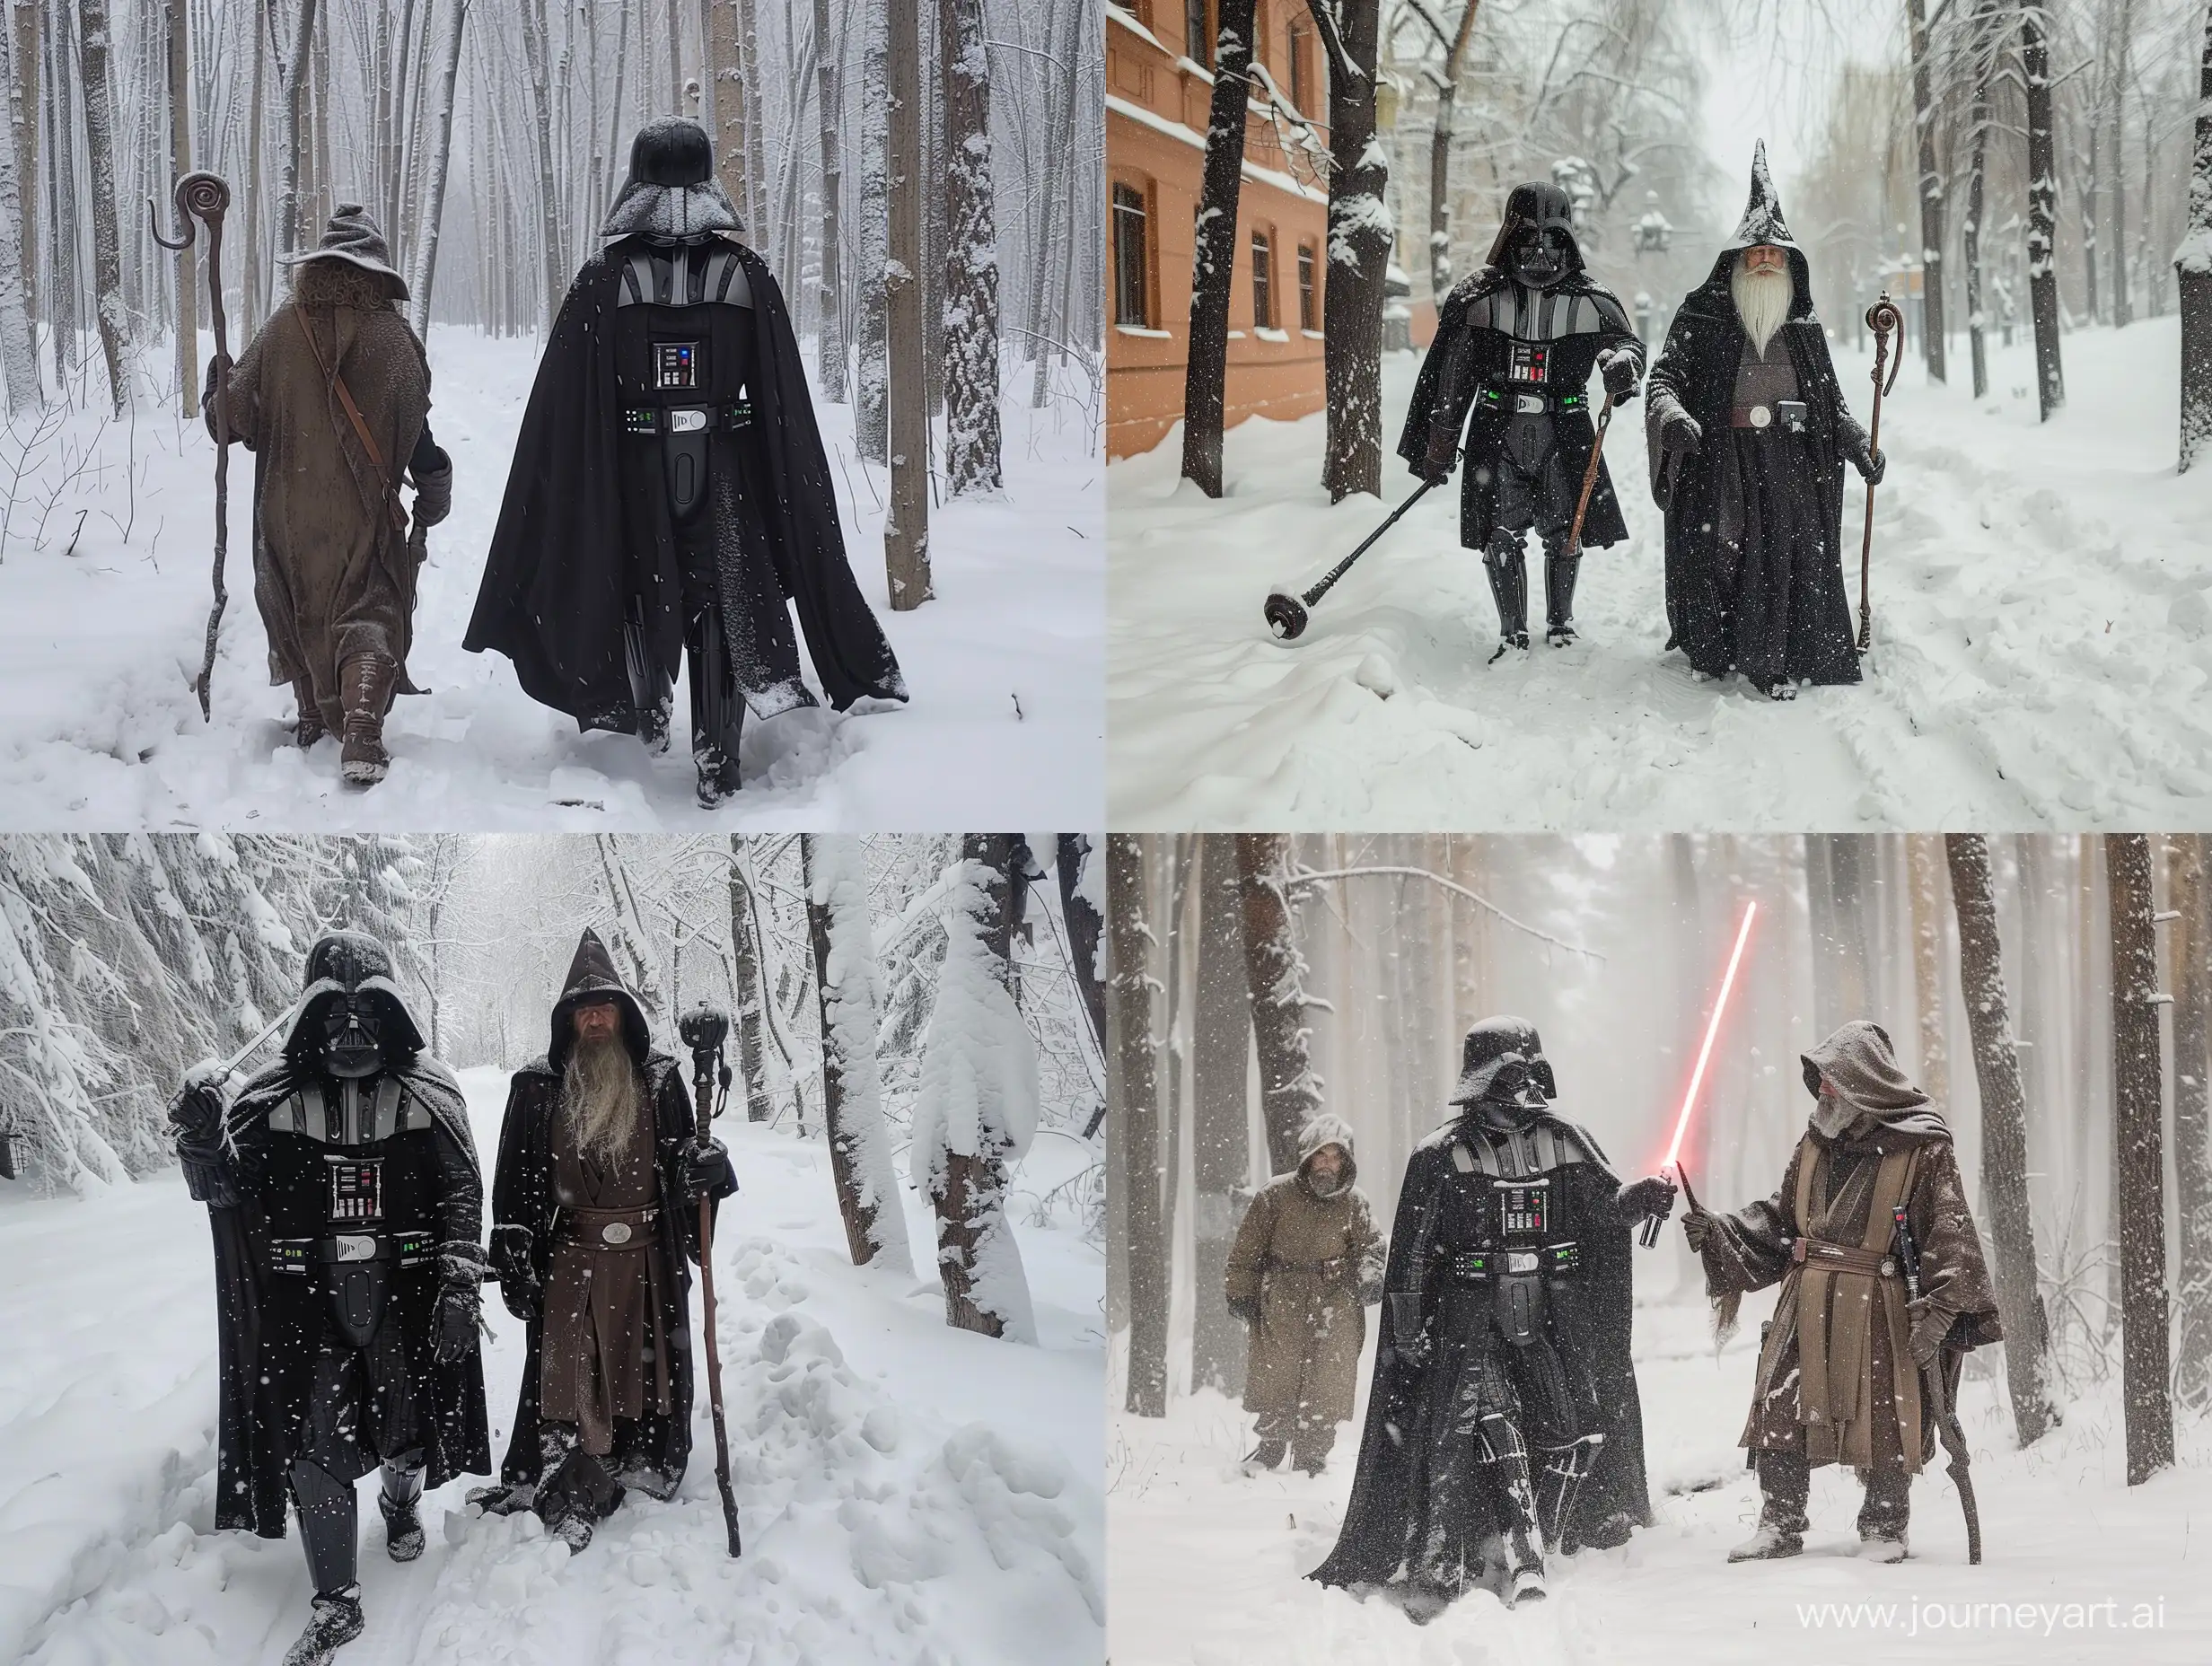 Darth Weider with a Gendalf and Frodo Begins got lost in snowy Moscow